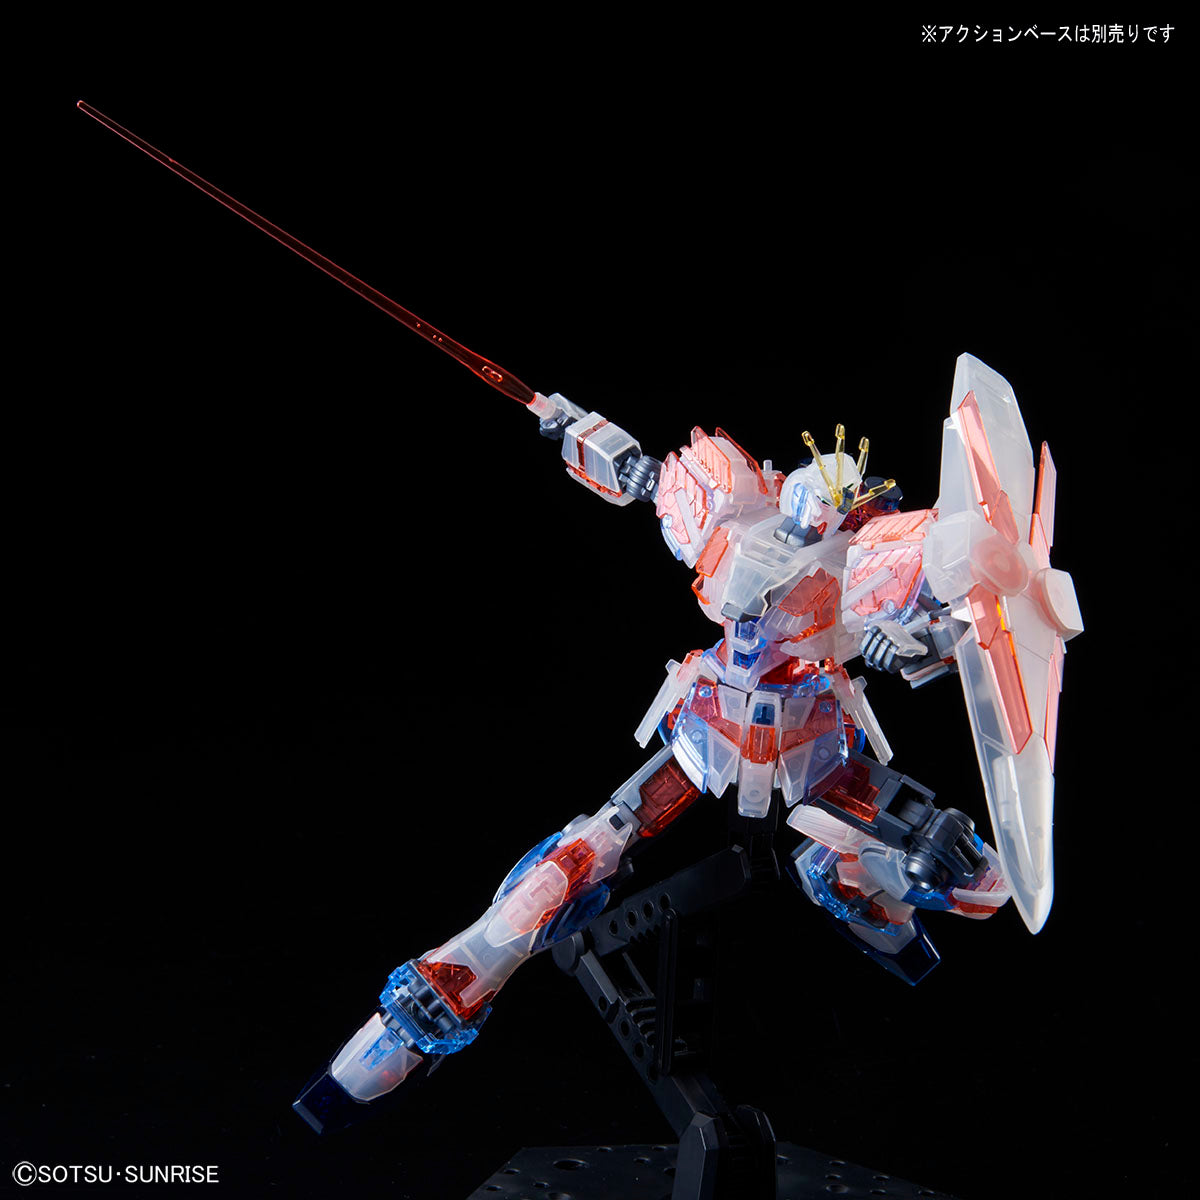 Event Limited HGUC 1/144 Narrative Gundam C Equipment Clear Color ver. Event Limited